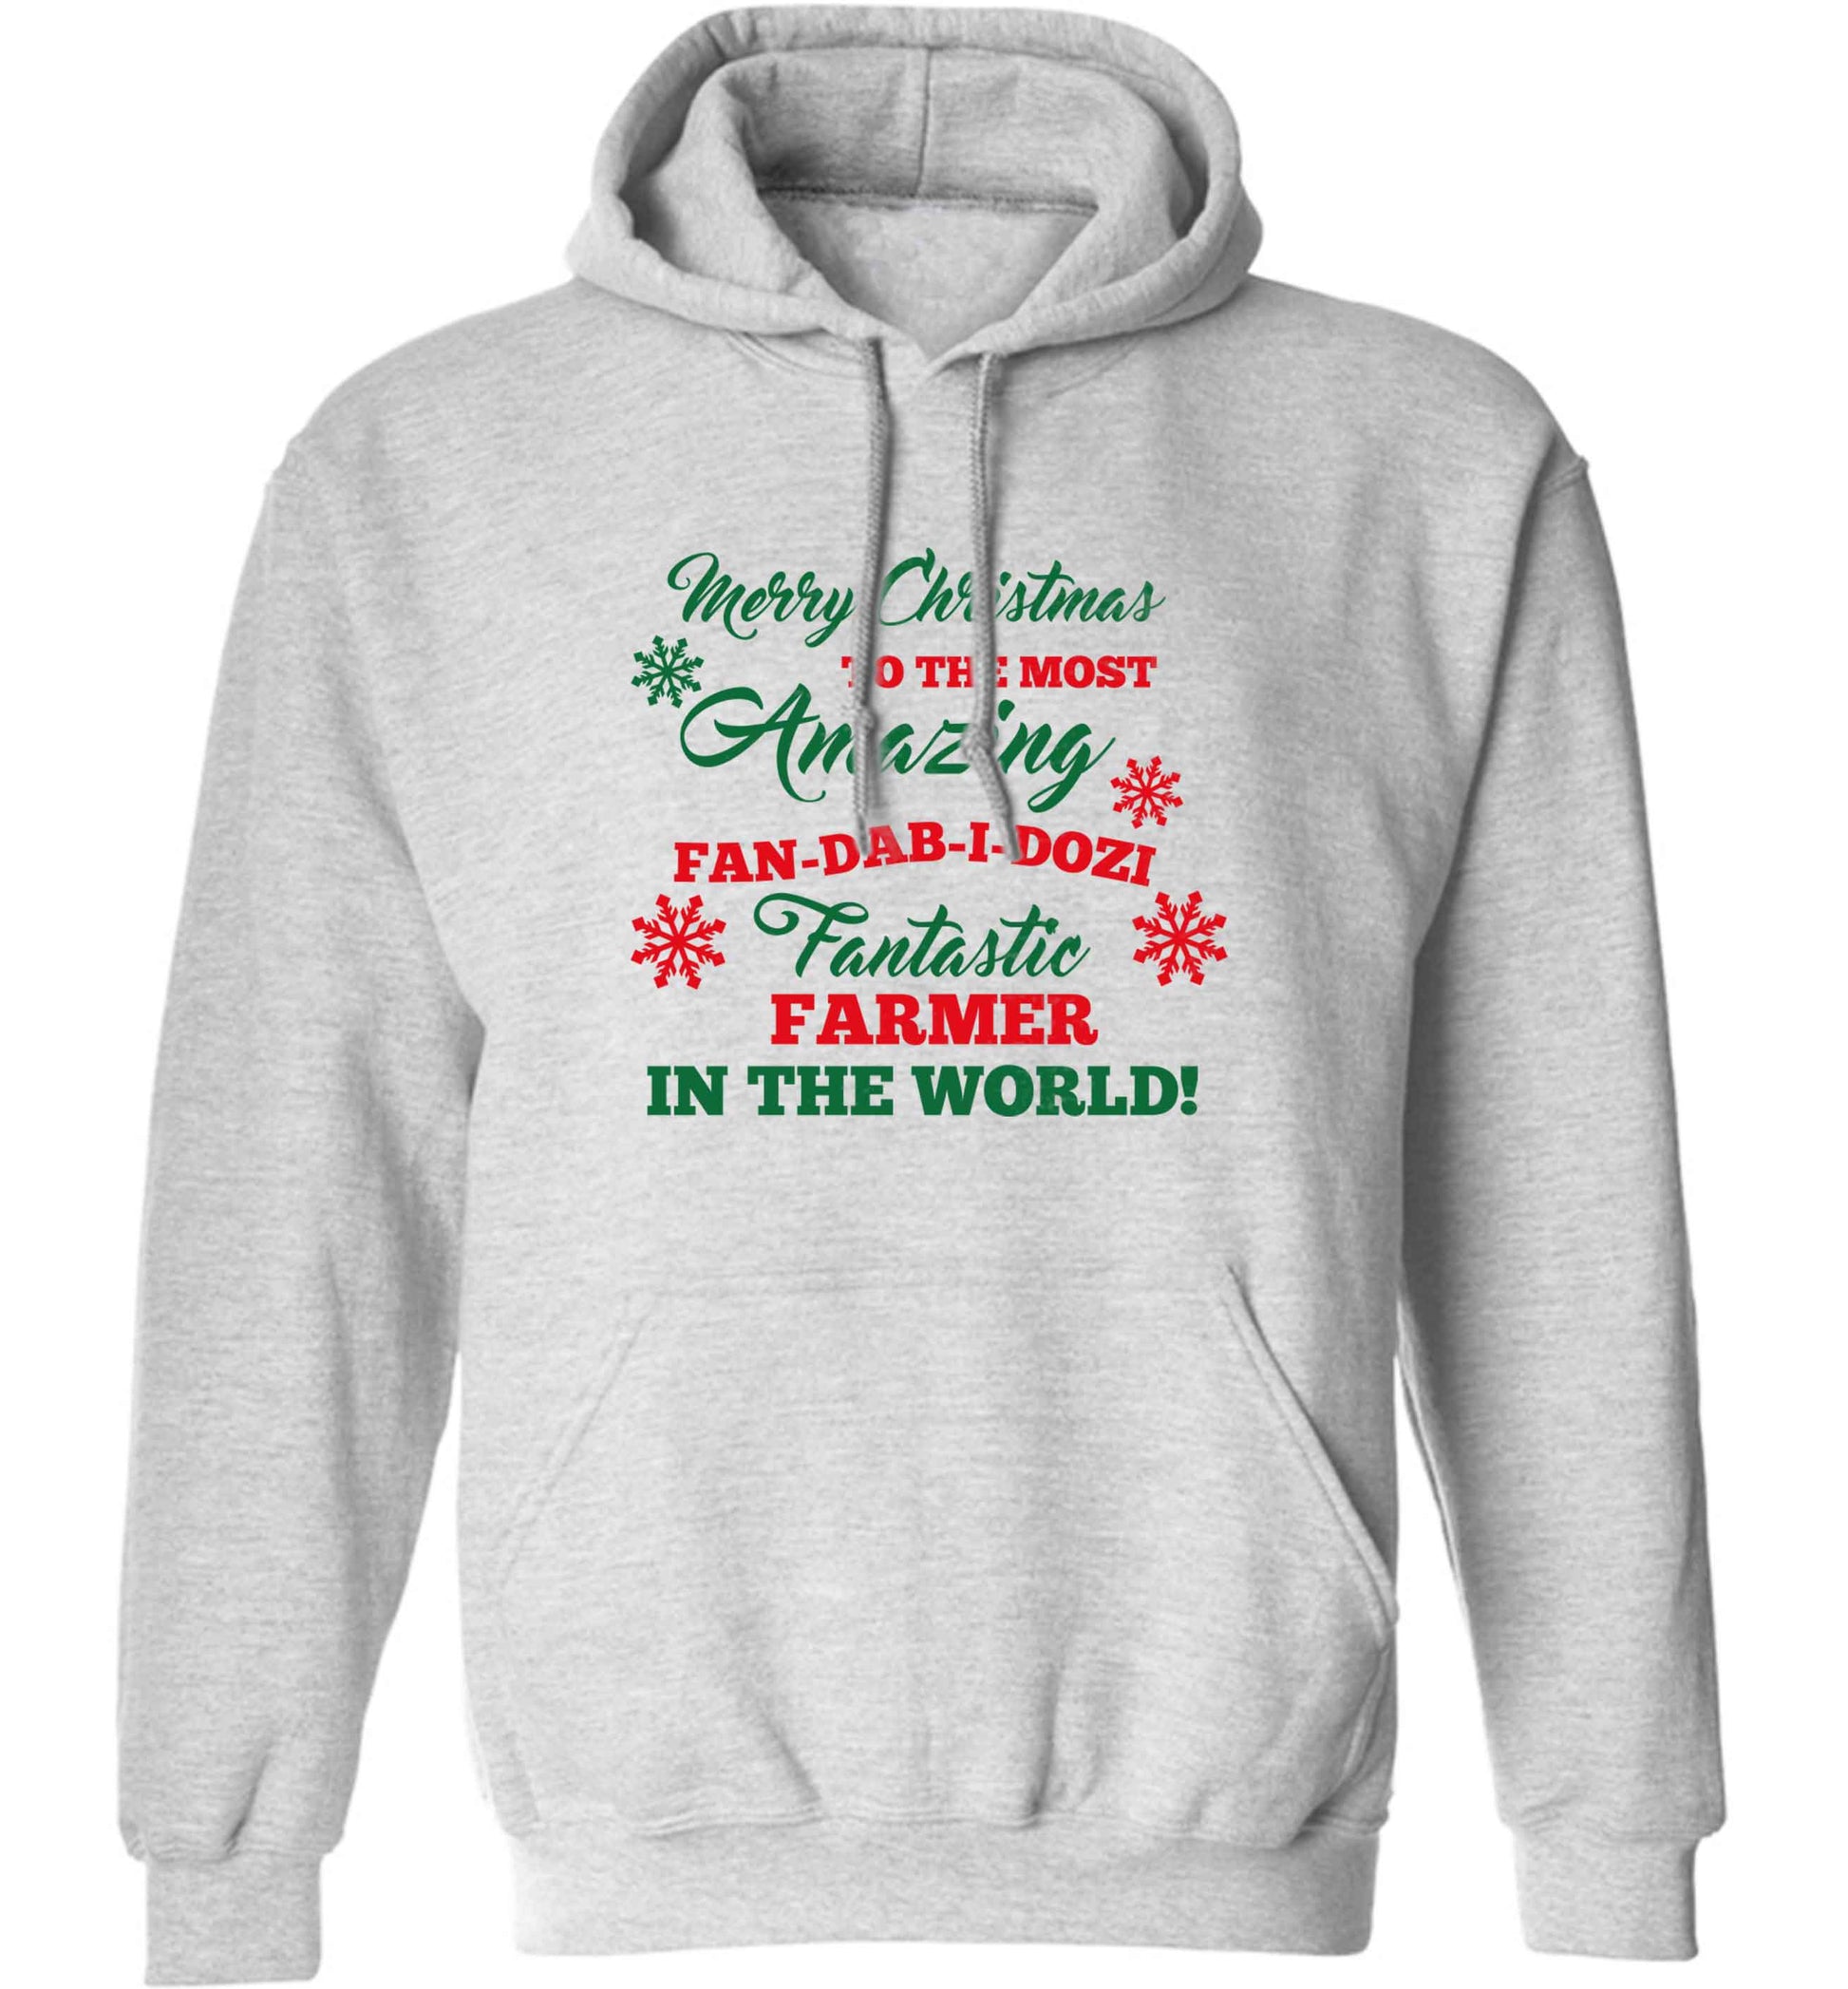 Merry Christmas to the most amazing farmer in the world! adults unisex grey hoodie 2XL